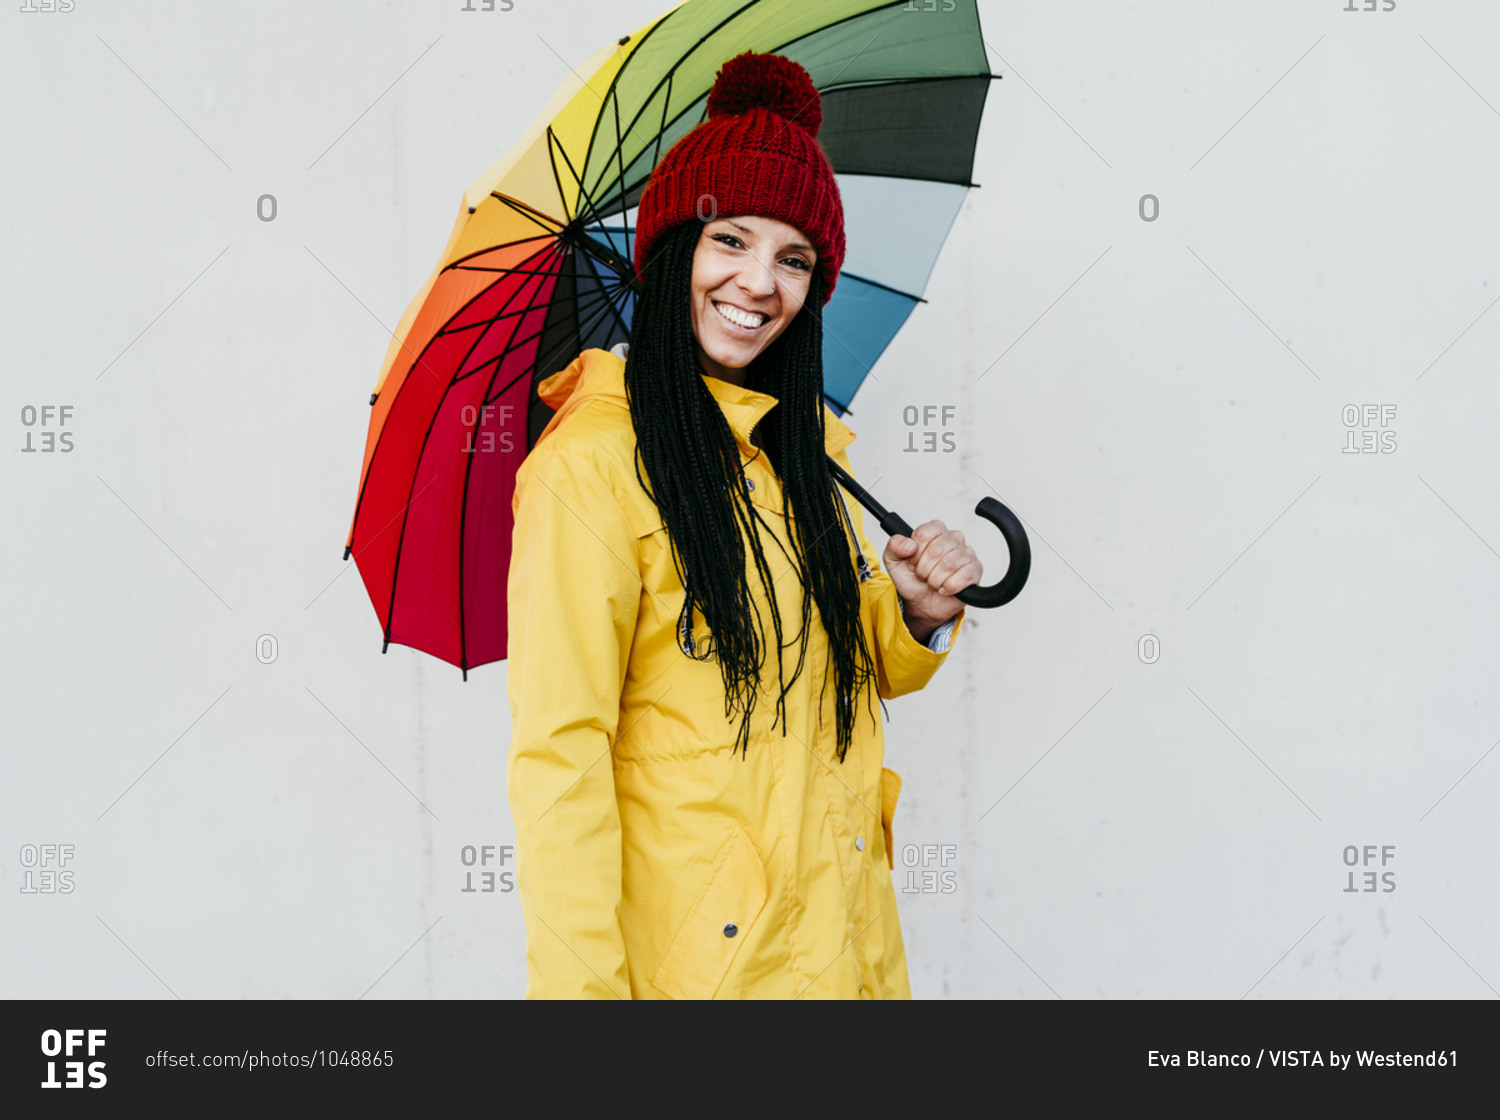 Smiling woman wearing raincoat holding colorful umbrella standing against wall